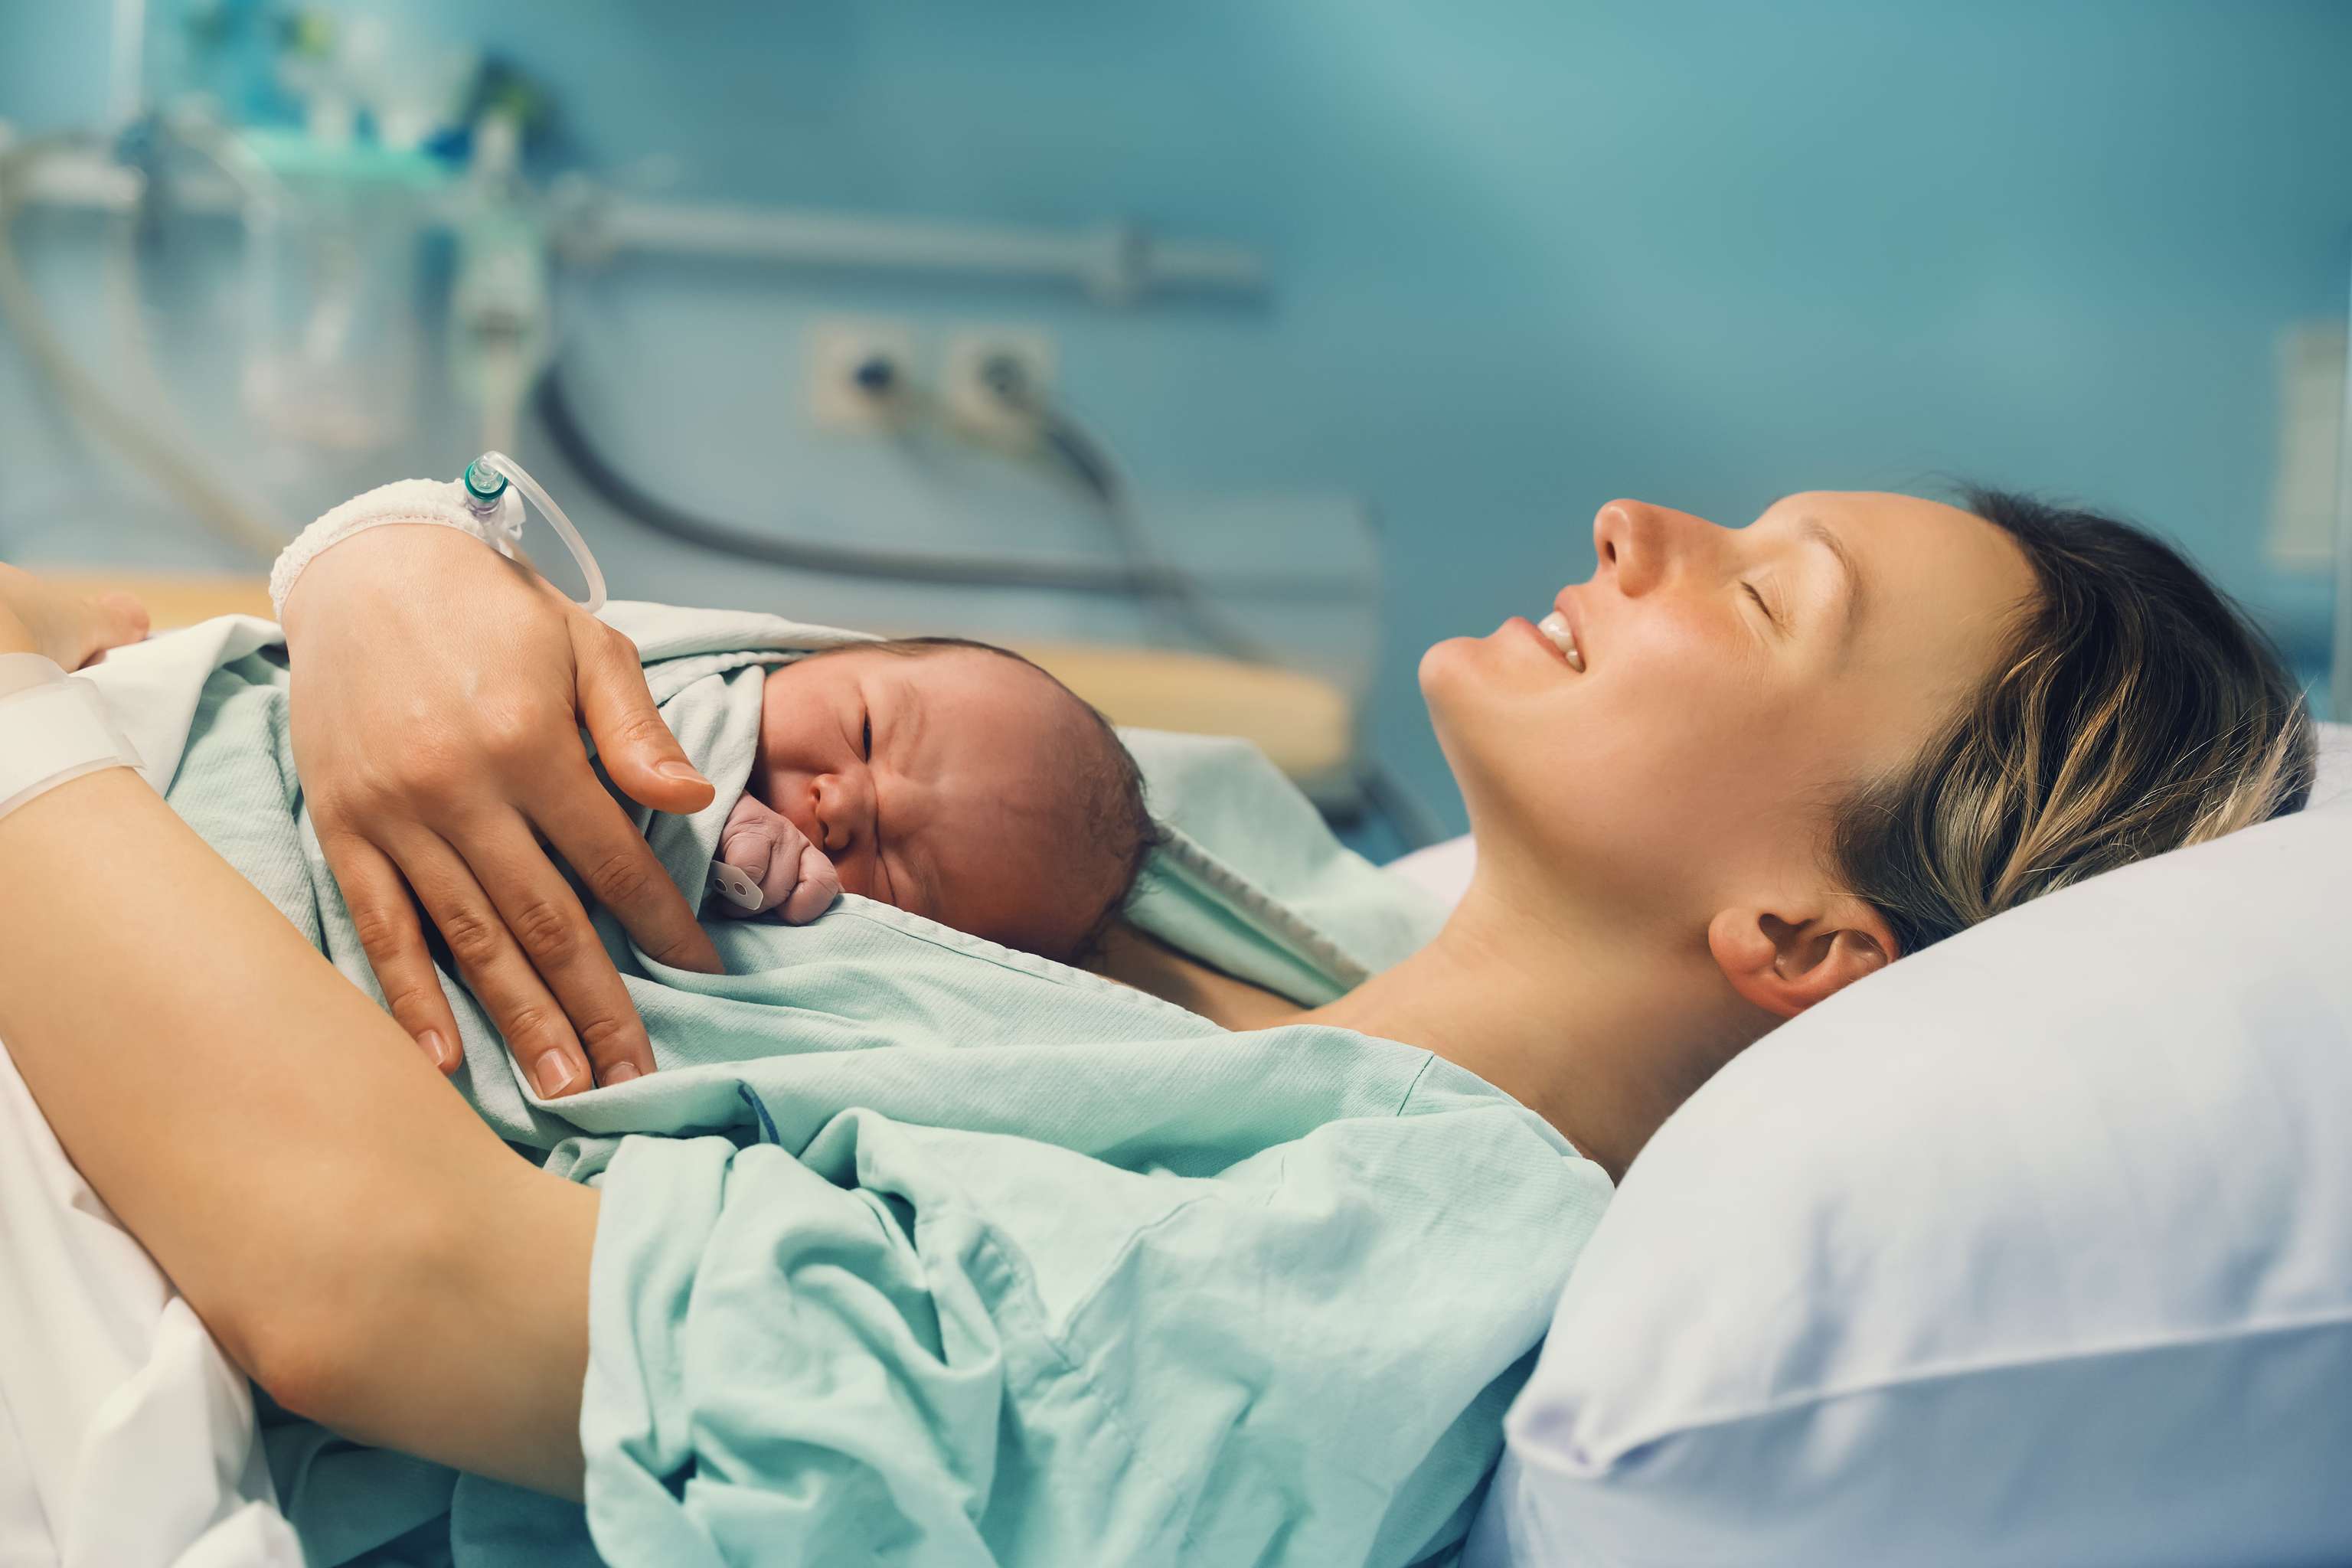 Does the kangaroo method help with preterm birth survival rates?